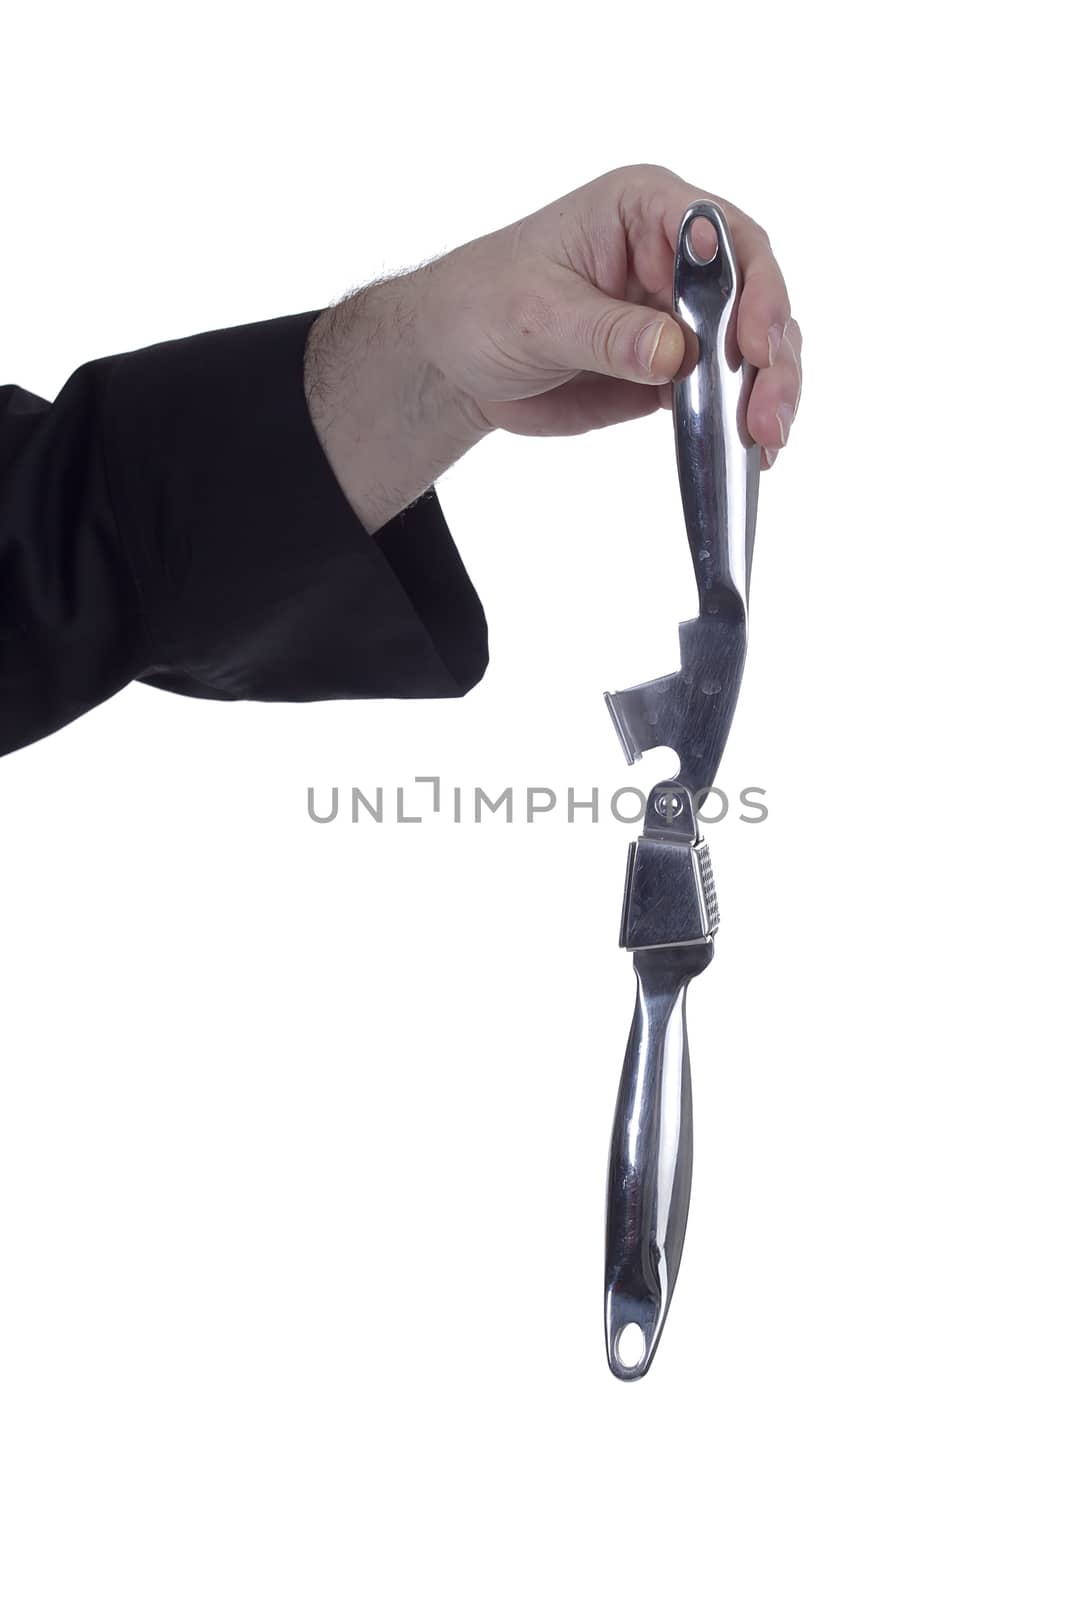 Garlic crusher in a hand on a white background